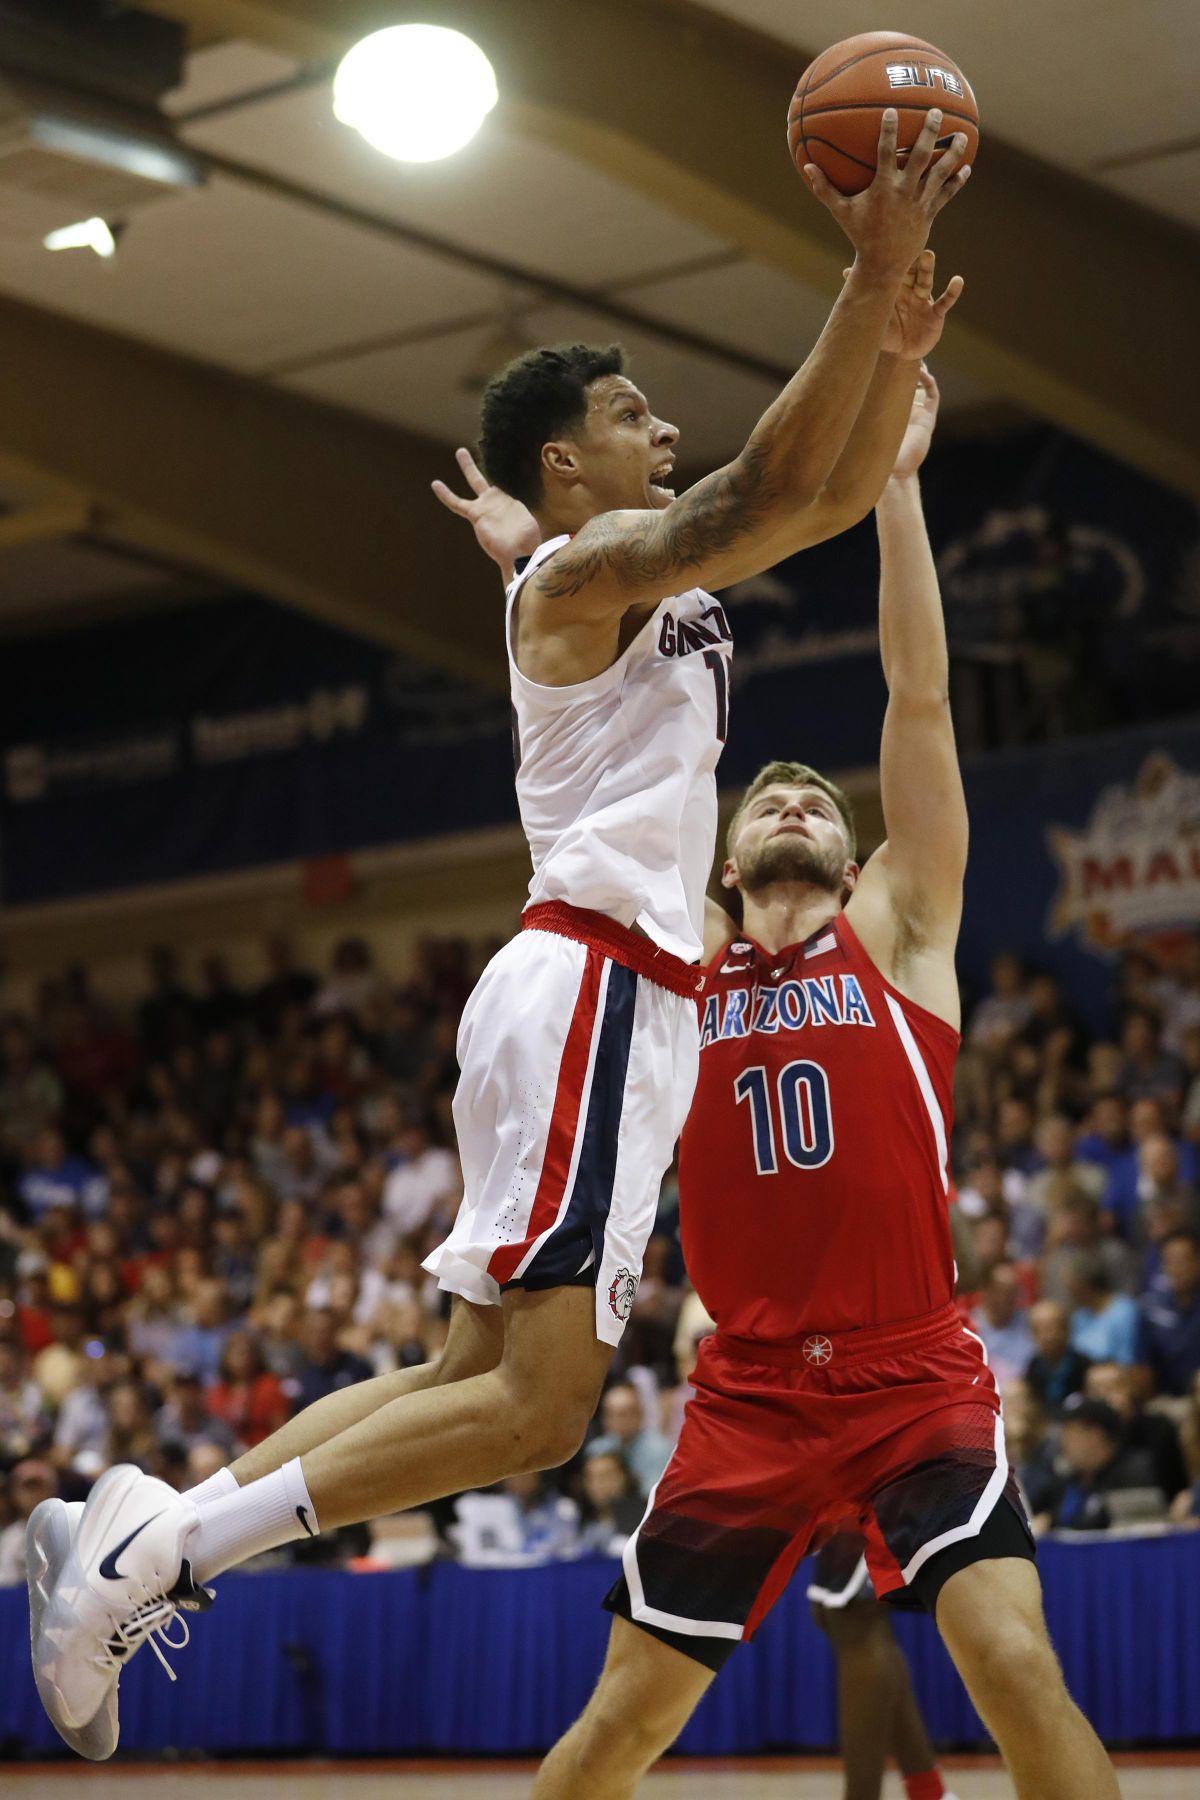 Gonzaga forward Brandon Clarke (15) leaps over Arizona forward Ryan Luther (10) during the first half of an NCAA college basketball game at the Maui Invitational, Tuesday, Nov. 20, 2018, in Lahaina, Hawaii. (Marco Garcia / Associated Press)